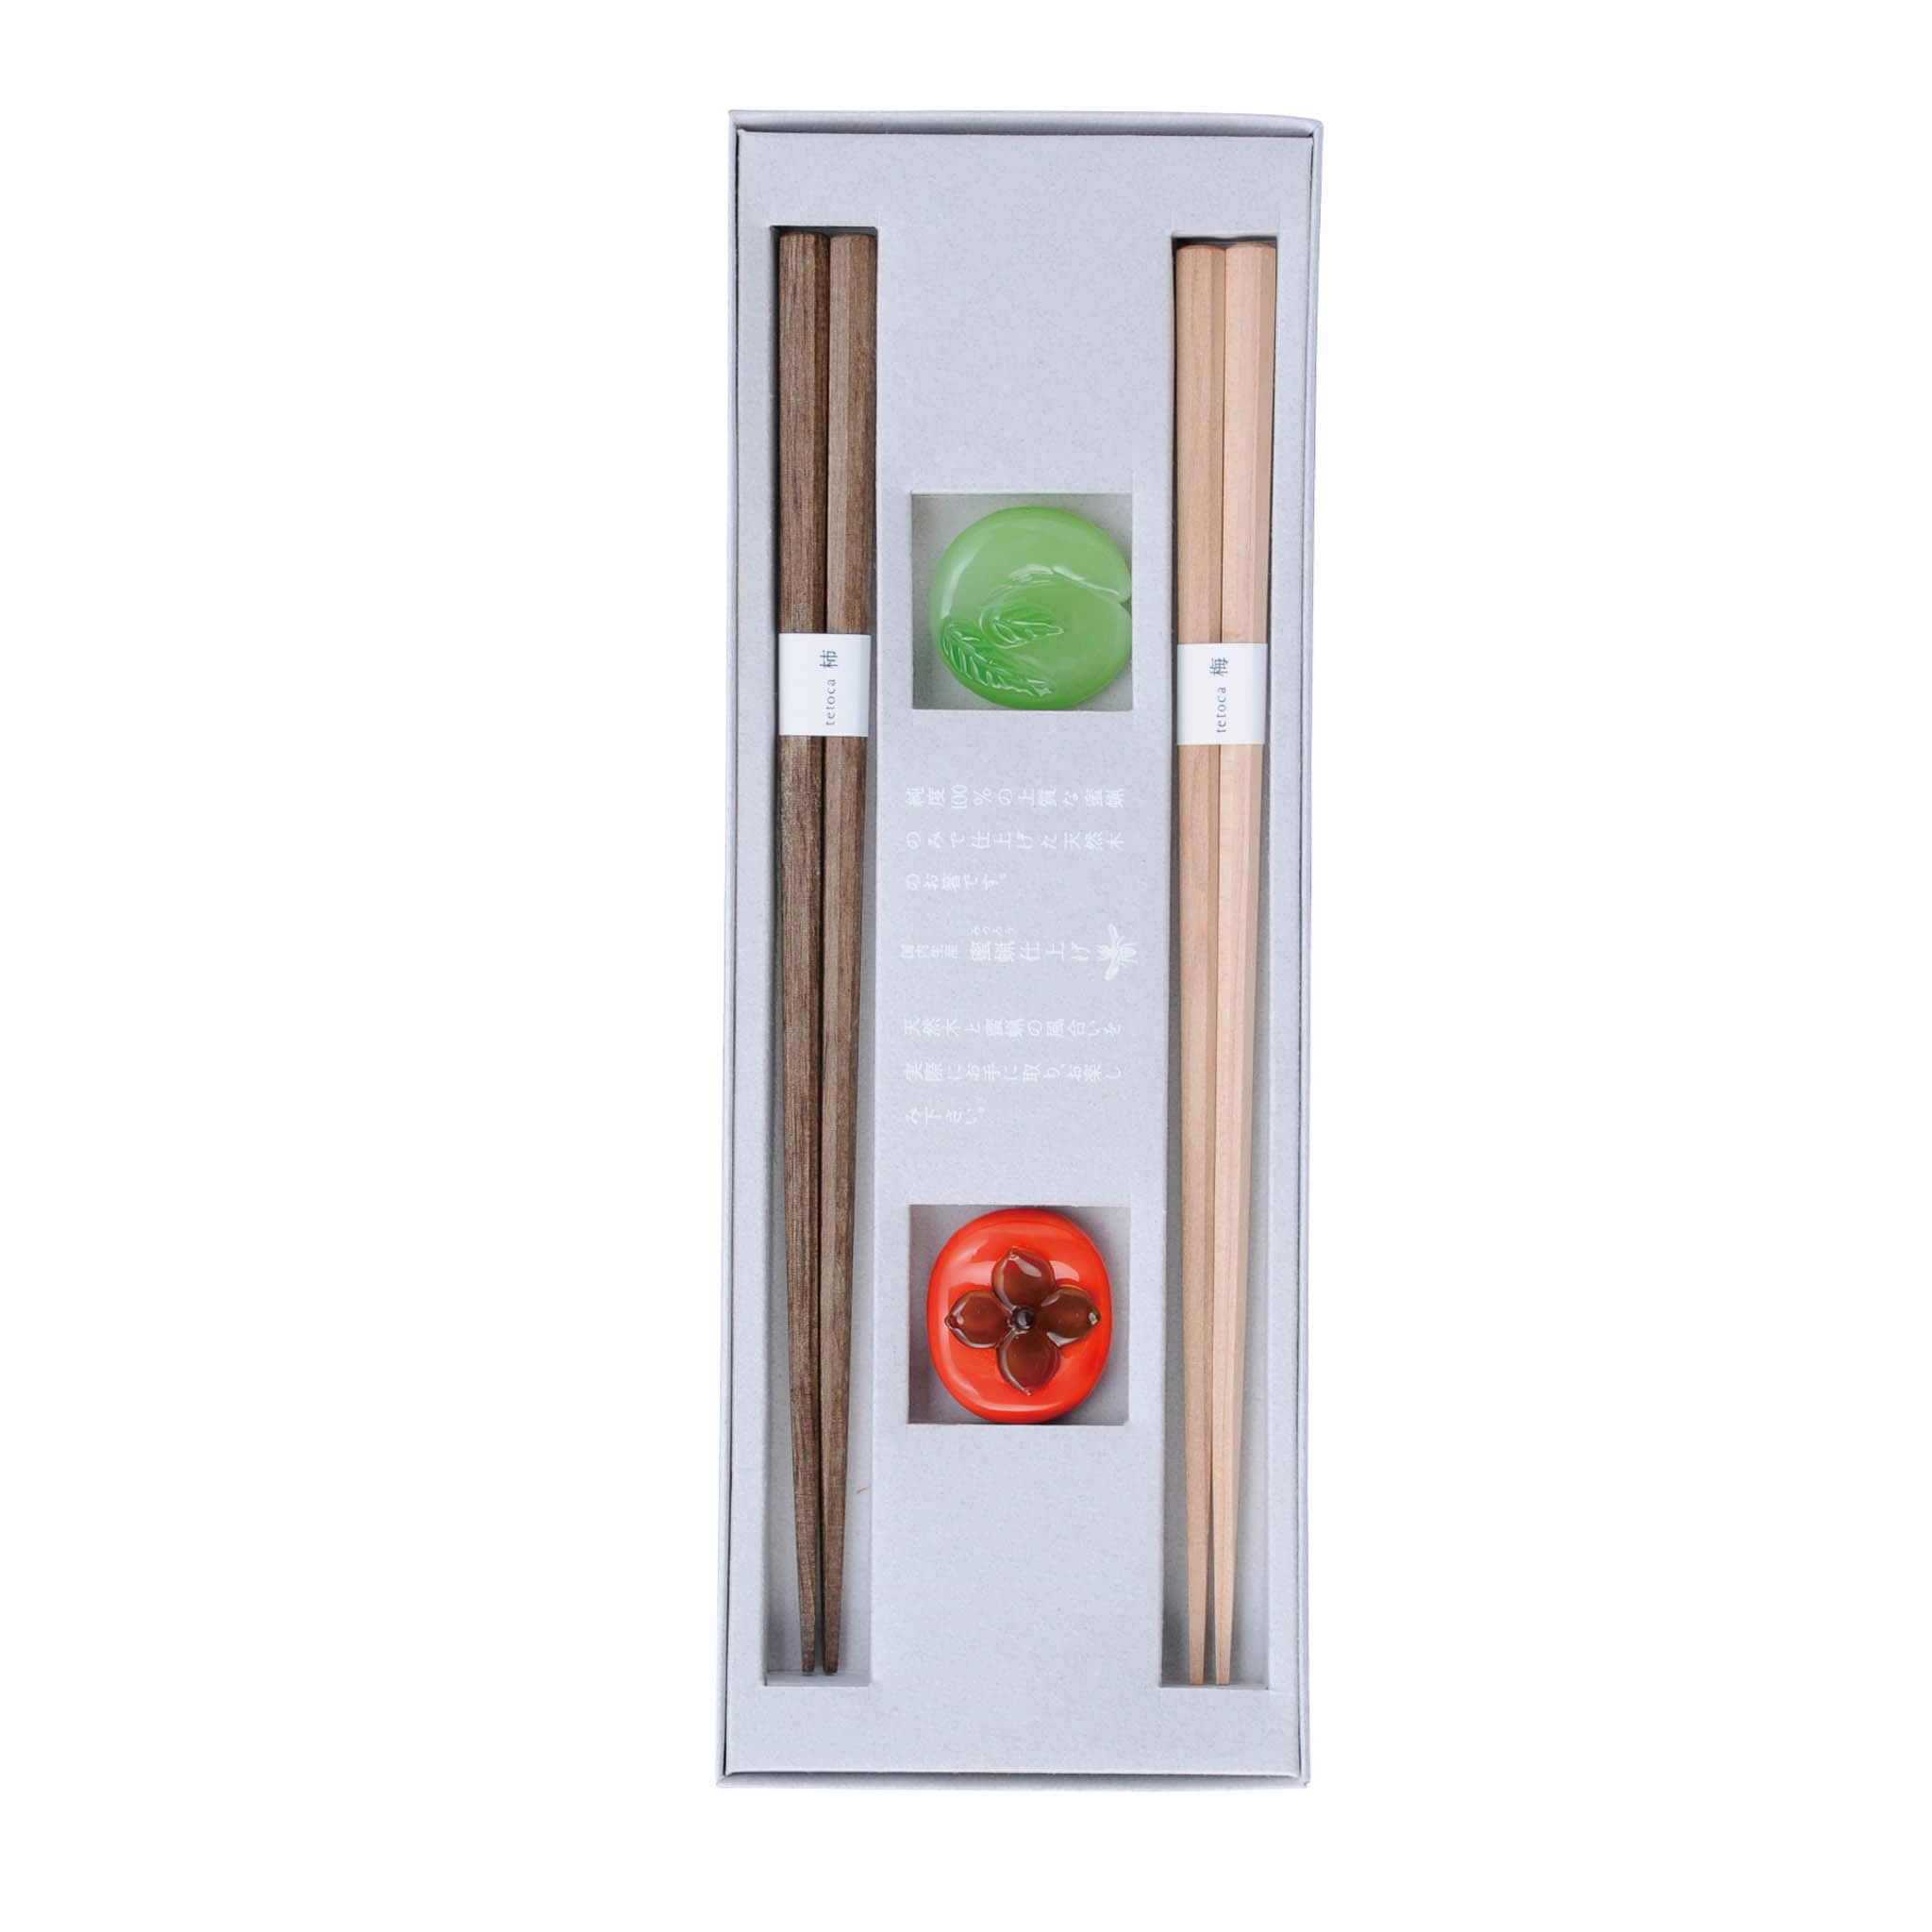 Persimmon & Plum Wood Chopstick Gift Set with Rests, 18cm